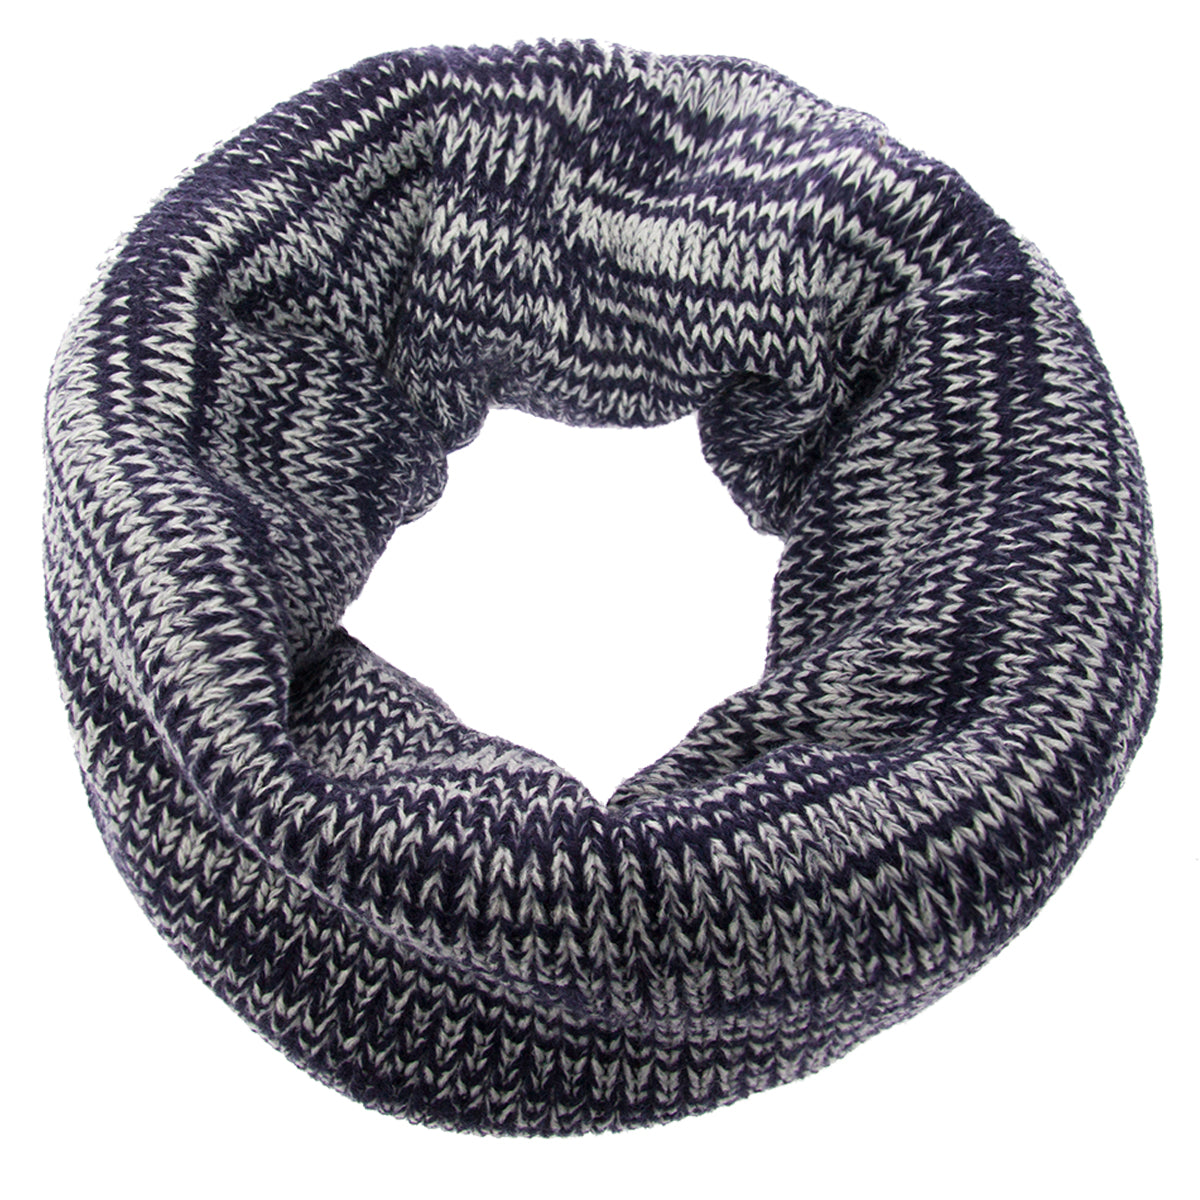 Reversible Knit Cowl Infinity Scarf by The Royal Standard